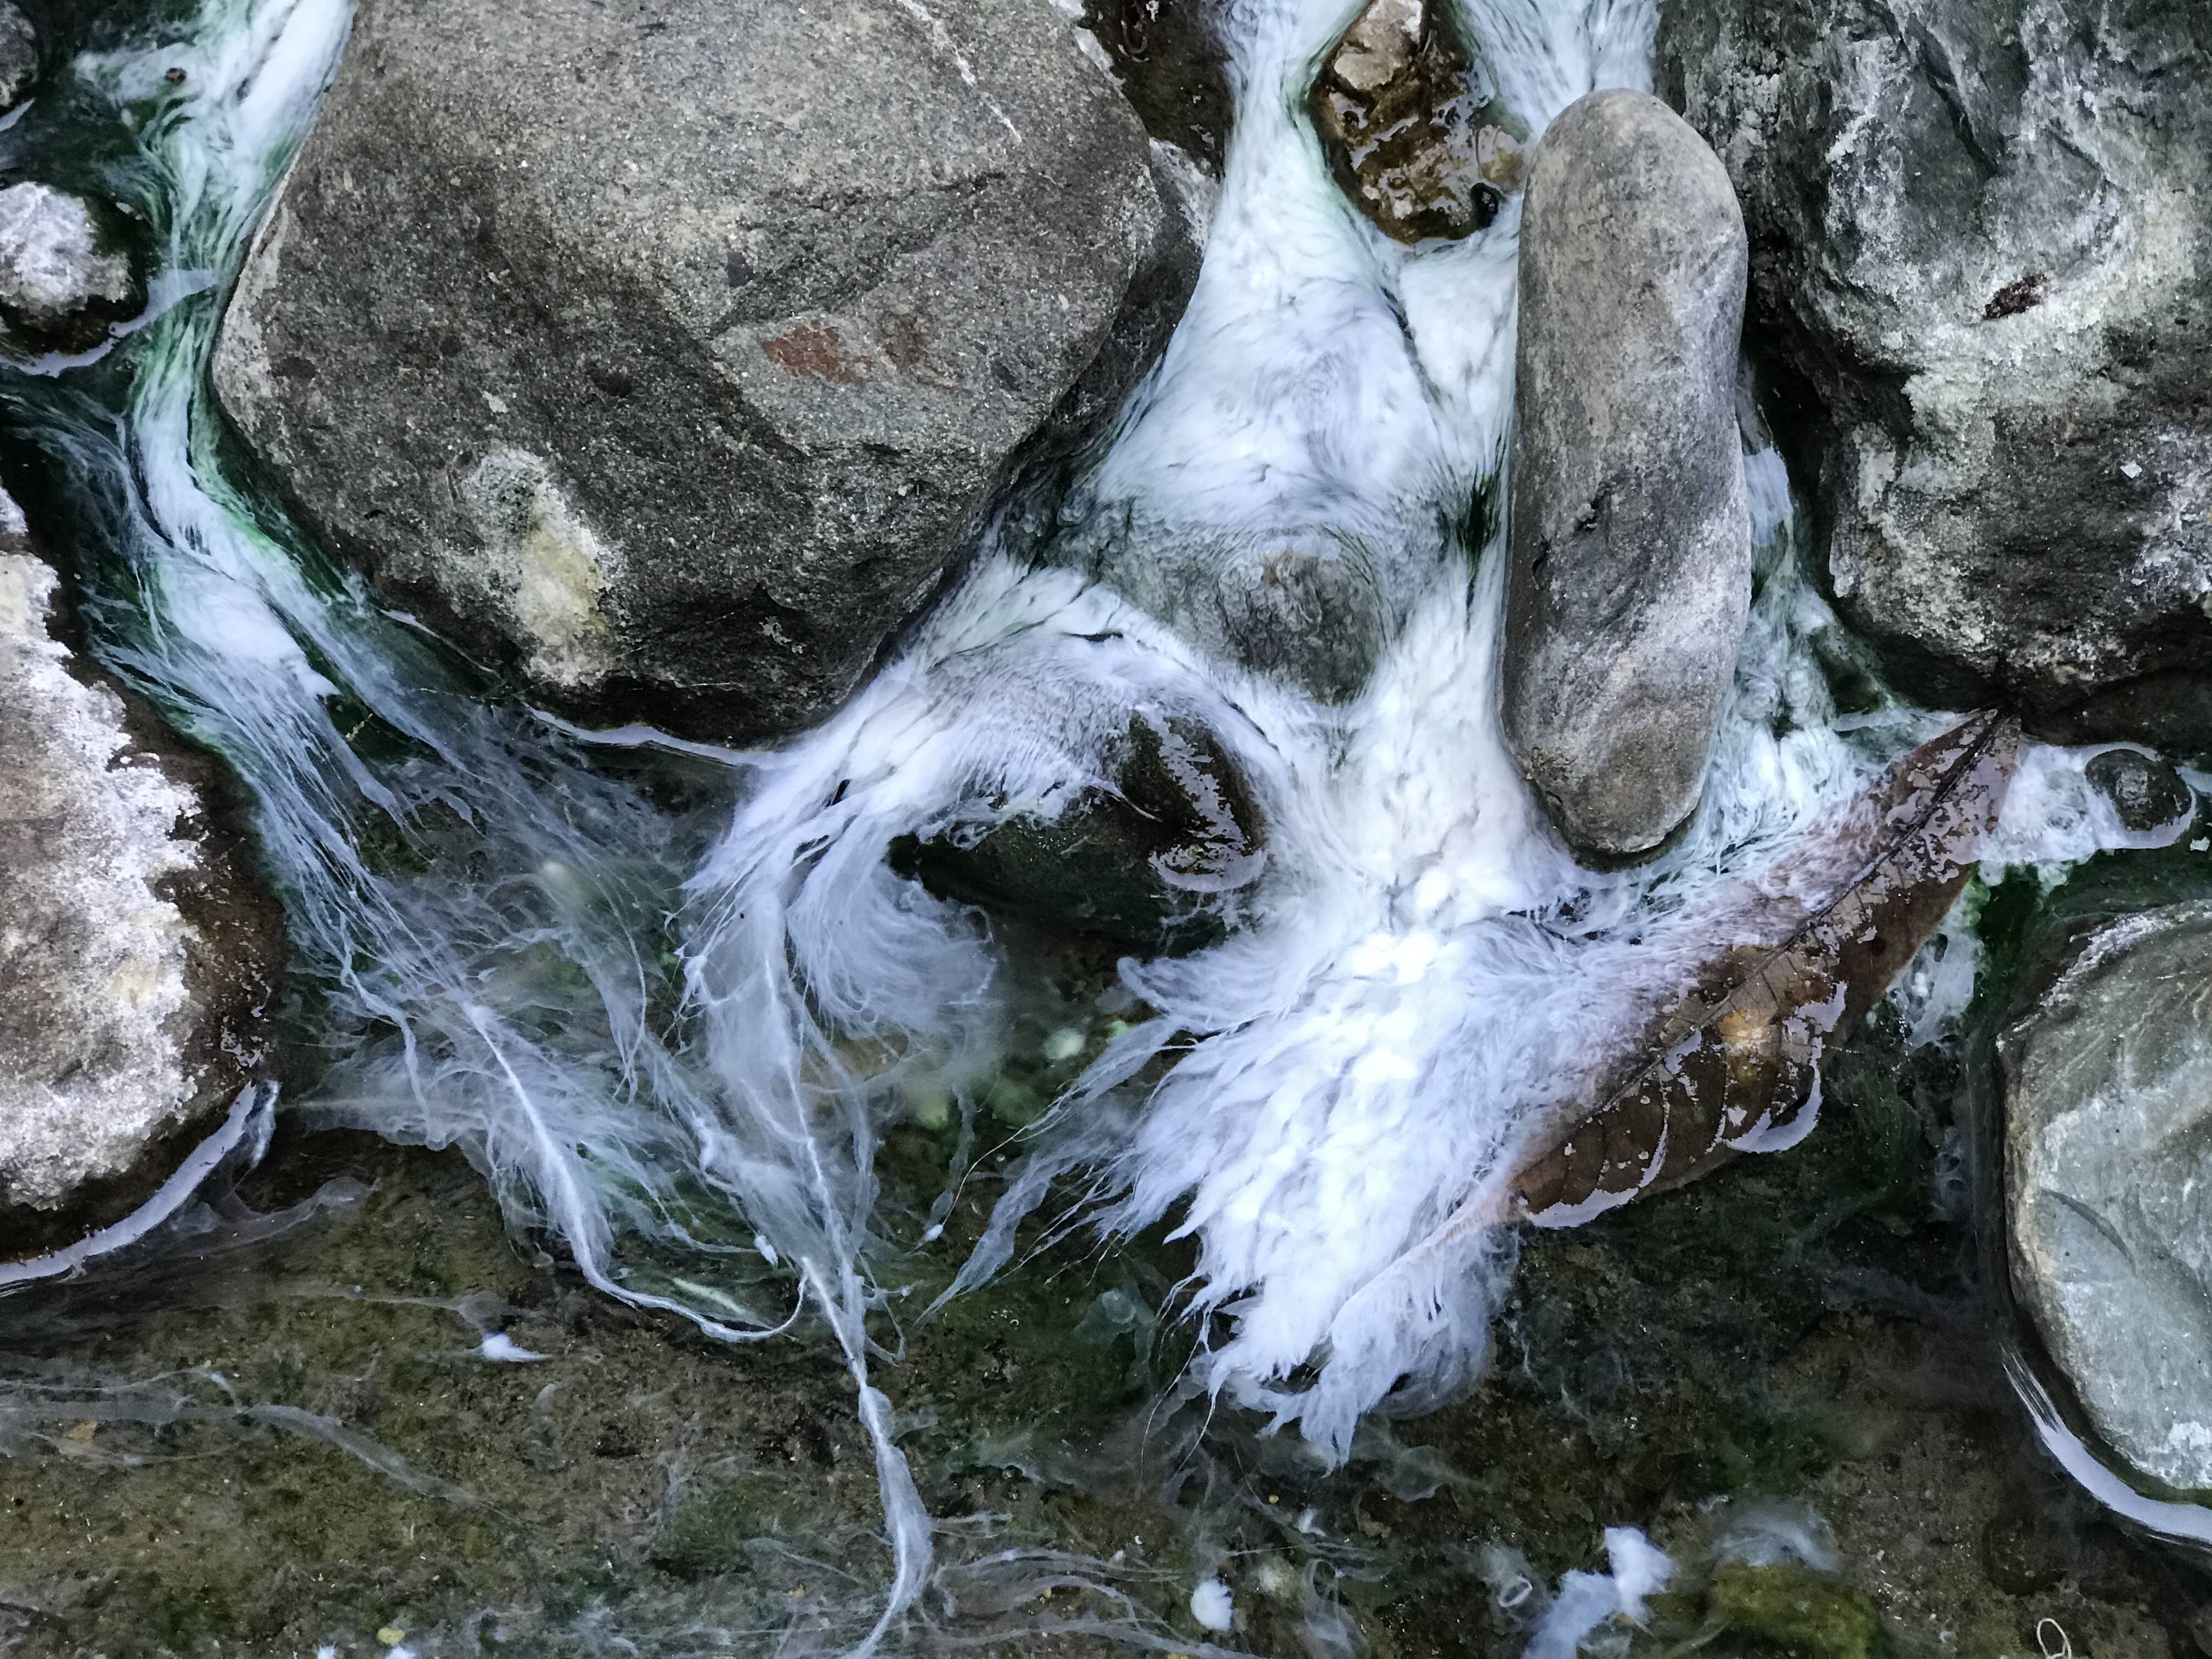 A white “froth” that is a microbial biofilm floats on the surface of a hot spring enclosed by gray rocks and filled with clear water.